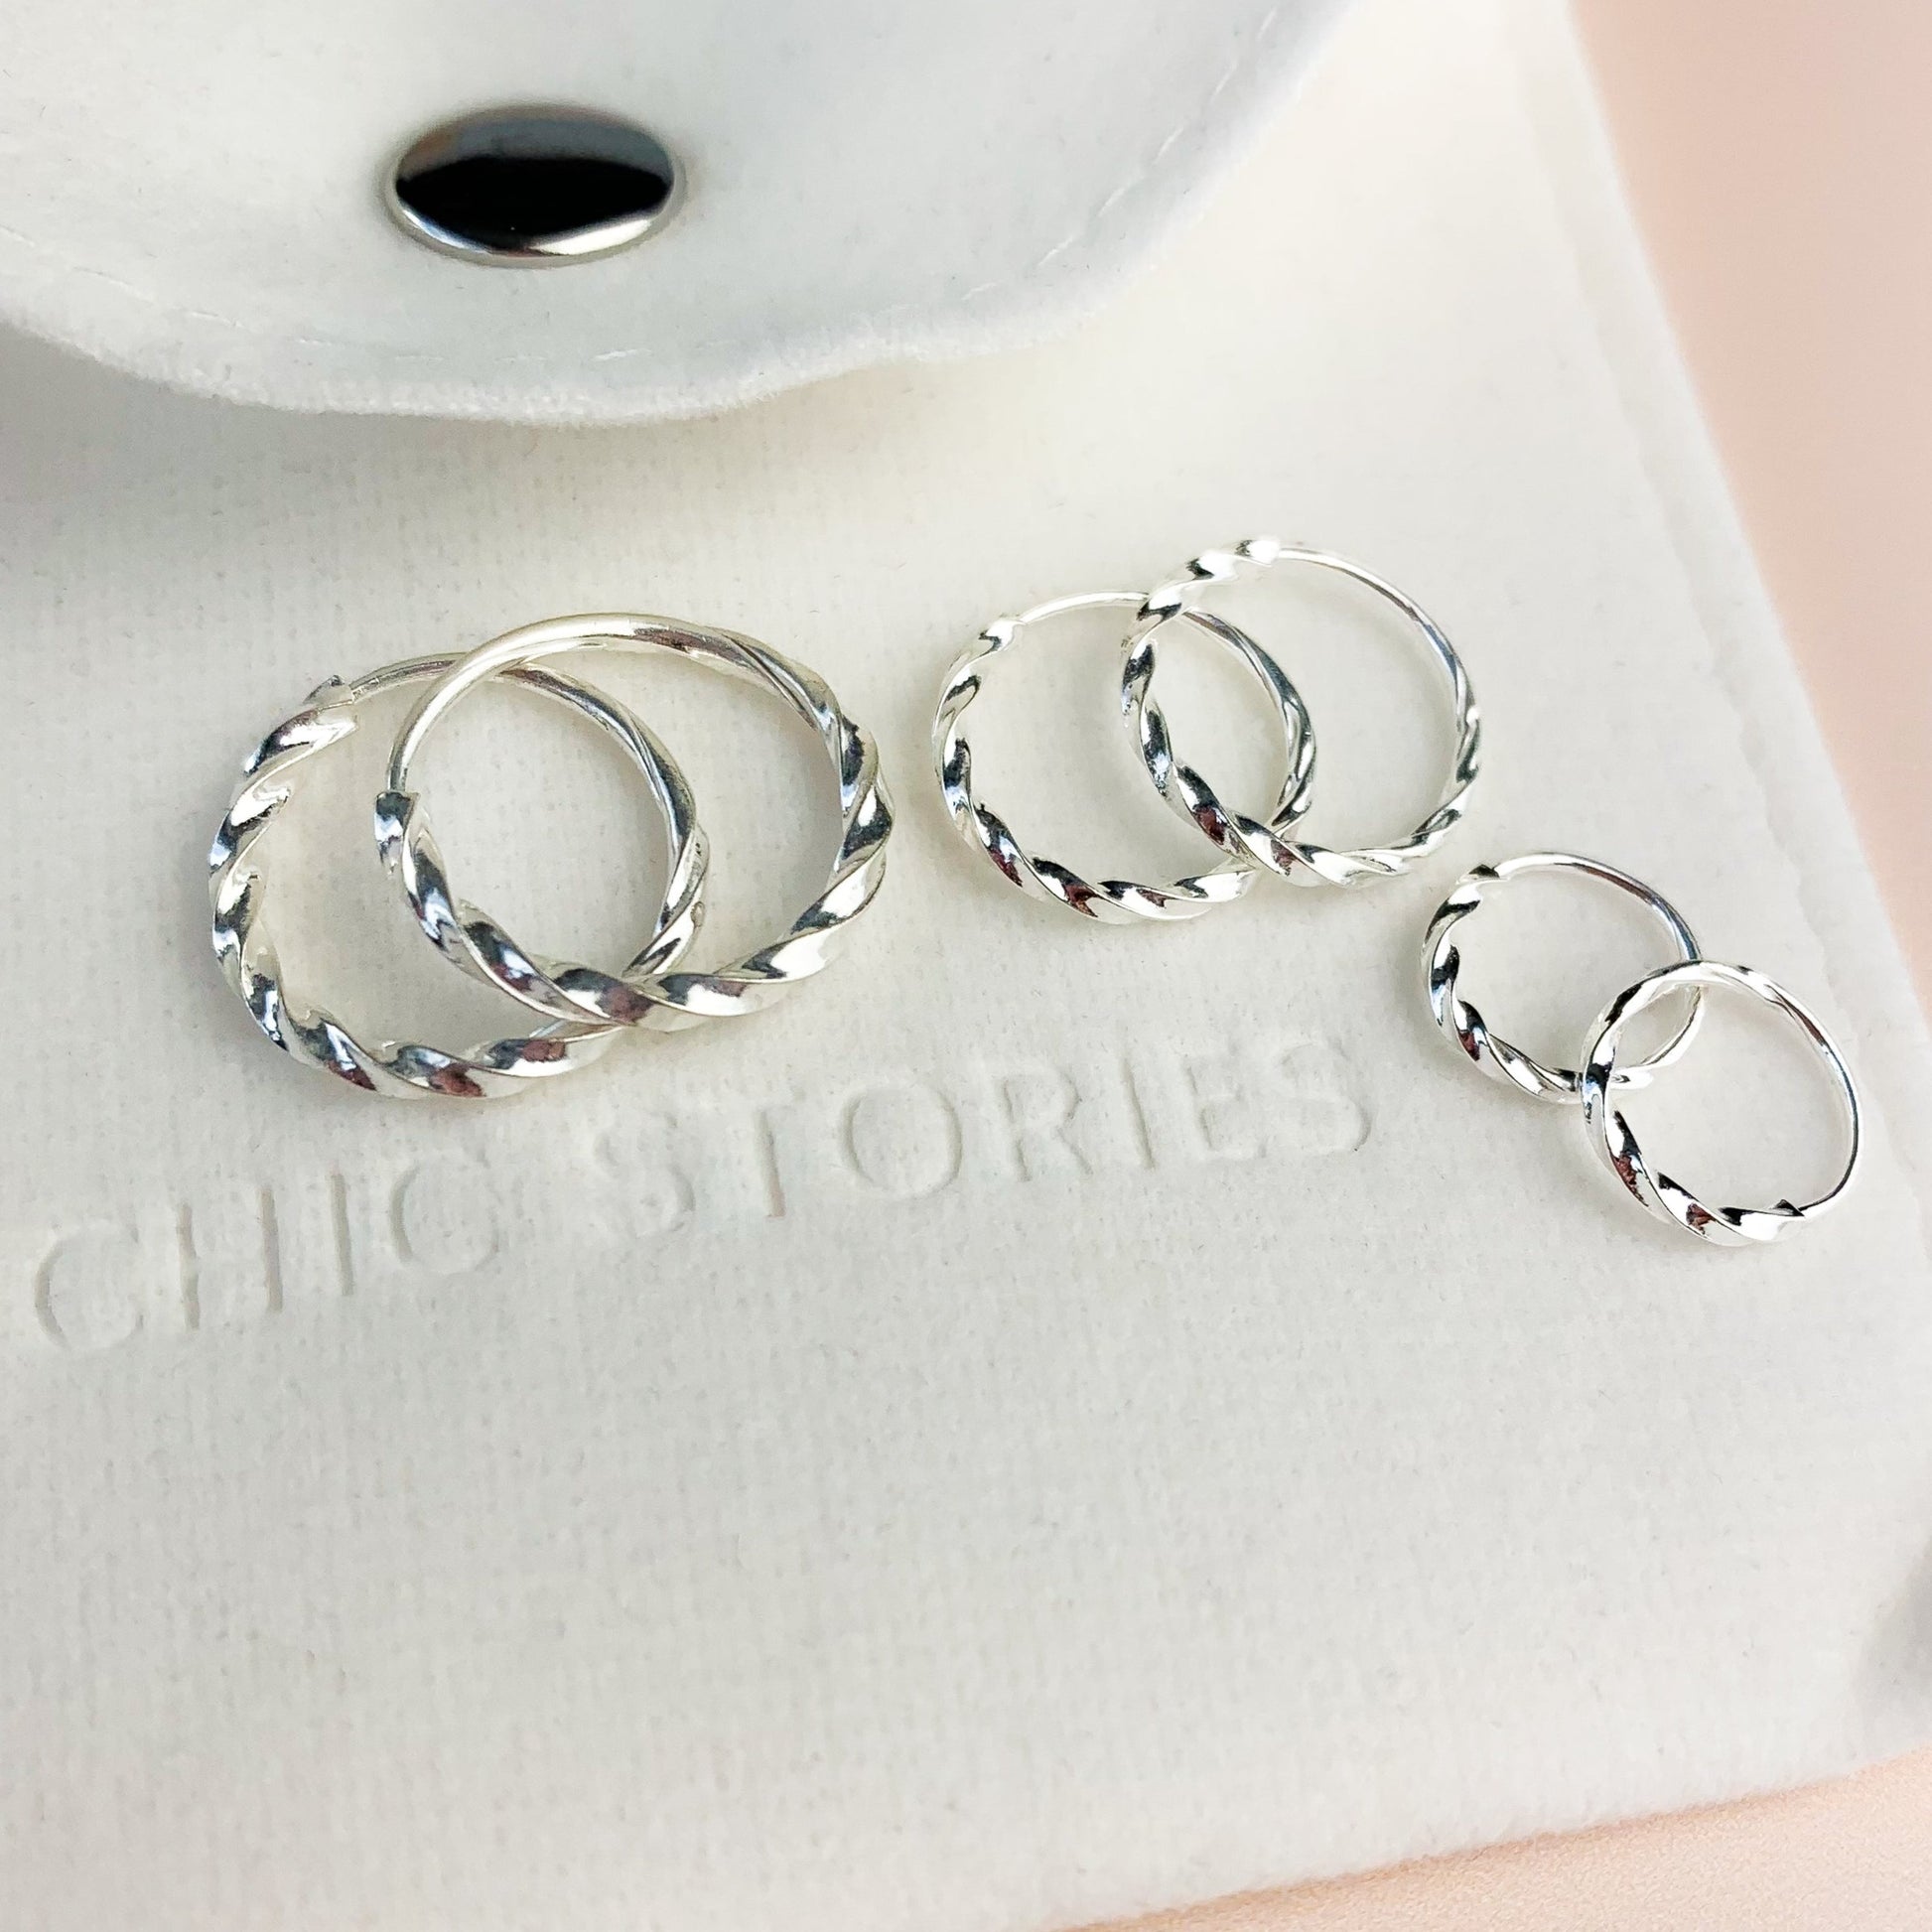 Twisted silver hoop earrings with a sleeper fastening, in three sizes. They sit on a white felt jewellery pouch, embossed with 'Chic Stories'